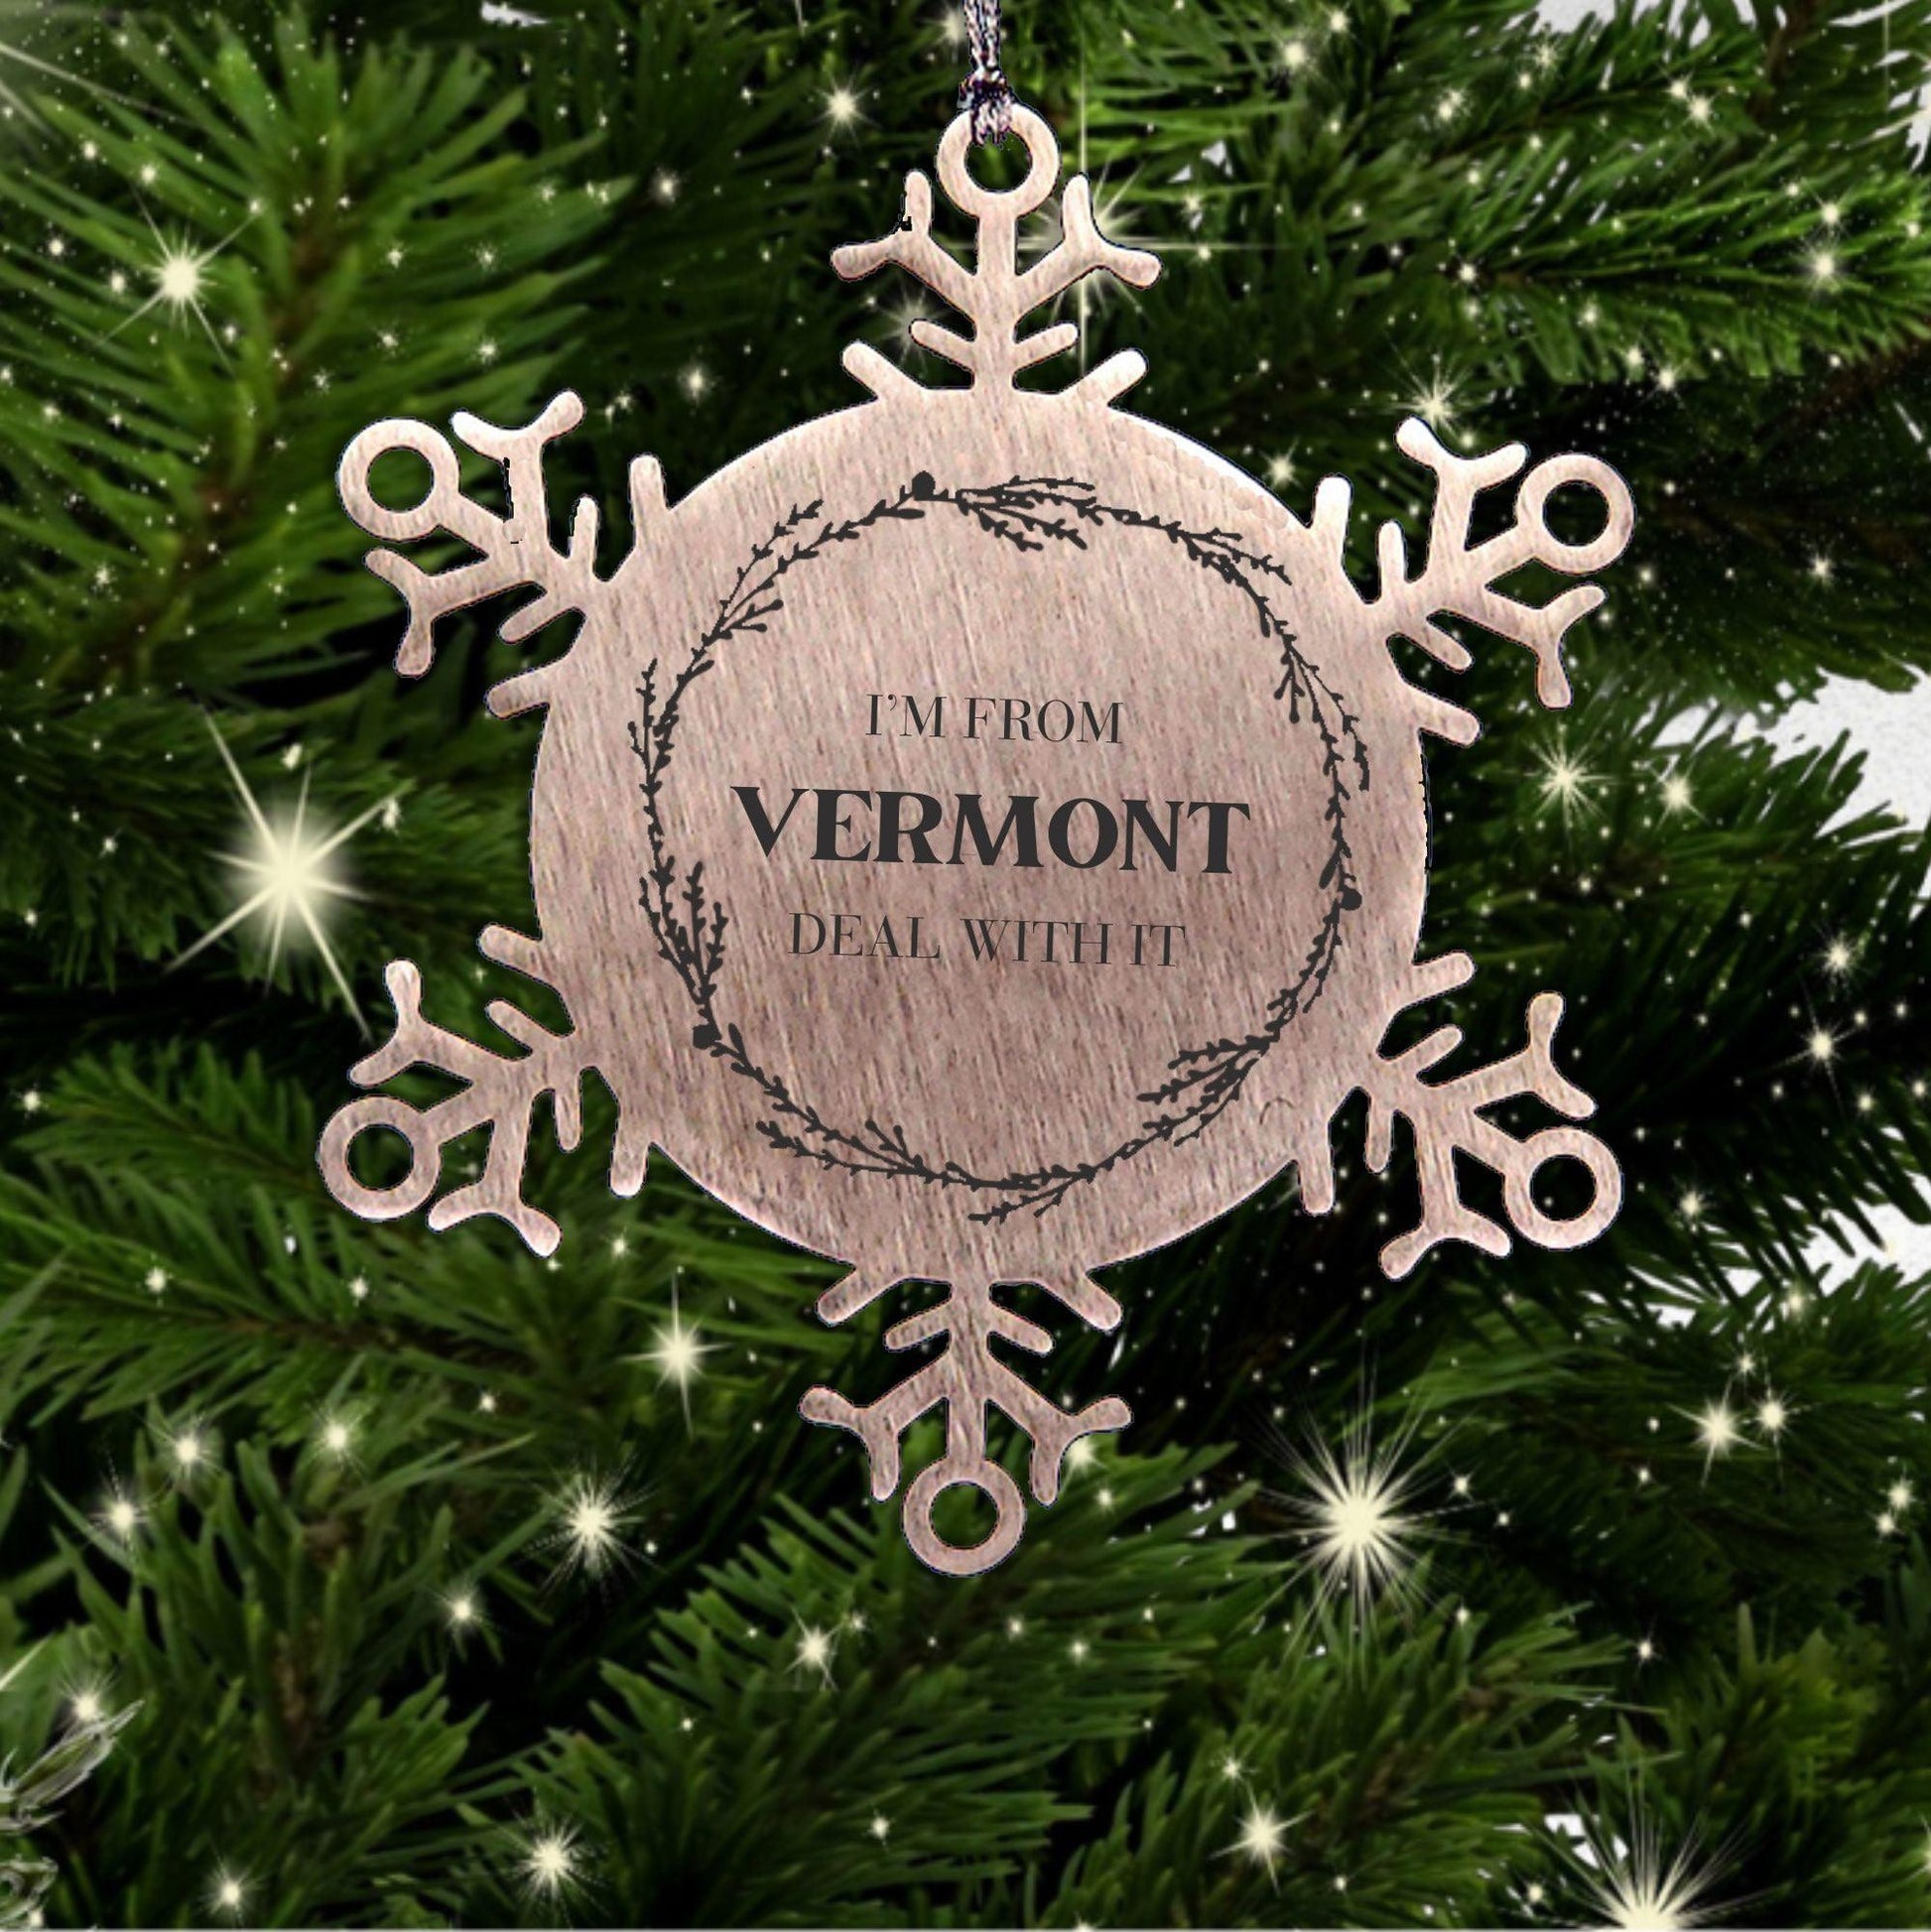 I'm from Vermont, Deal with it, Proud Vermont State Ornament Gifts, Vermont Snowflake Ornament Gift Idea, Christmas Gifts for Vermont People, Coworkers, Colleague - Mallard Moon Gift Shop